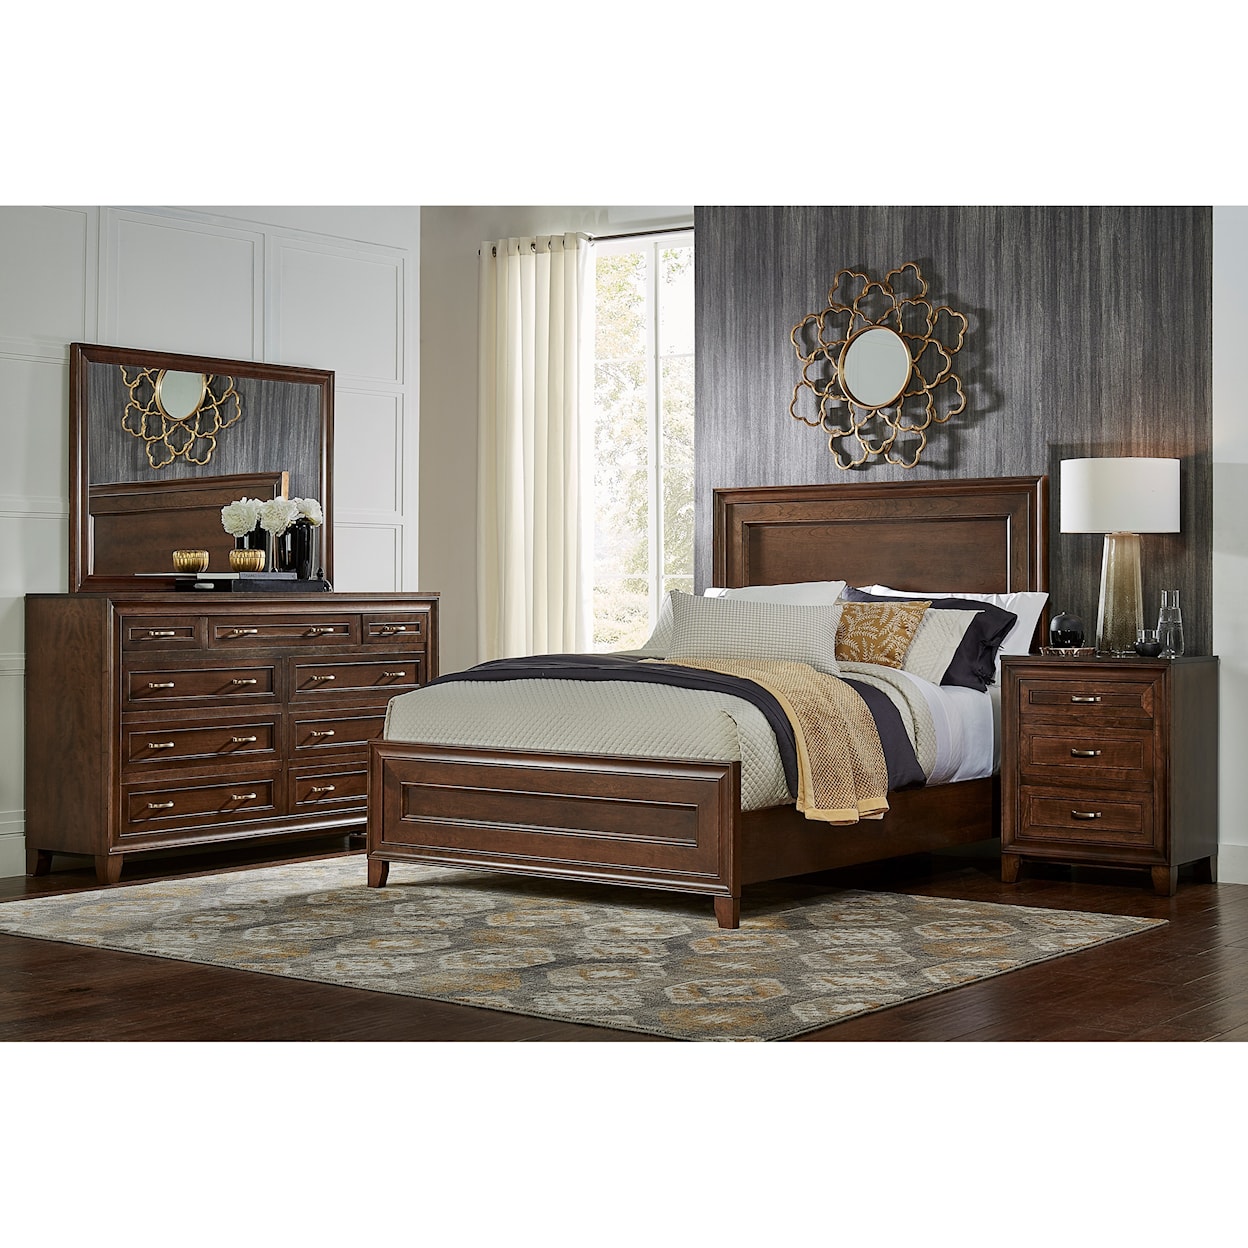 Daniels Amish Summerville Queen Bed with Standard Height Footboard